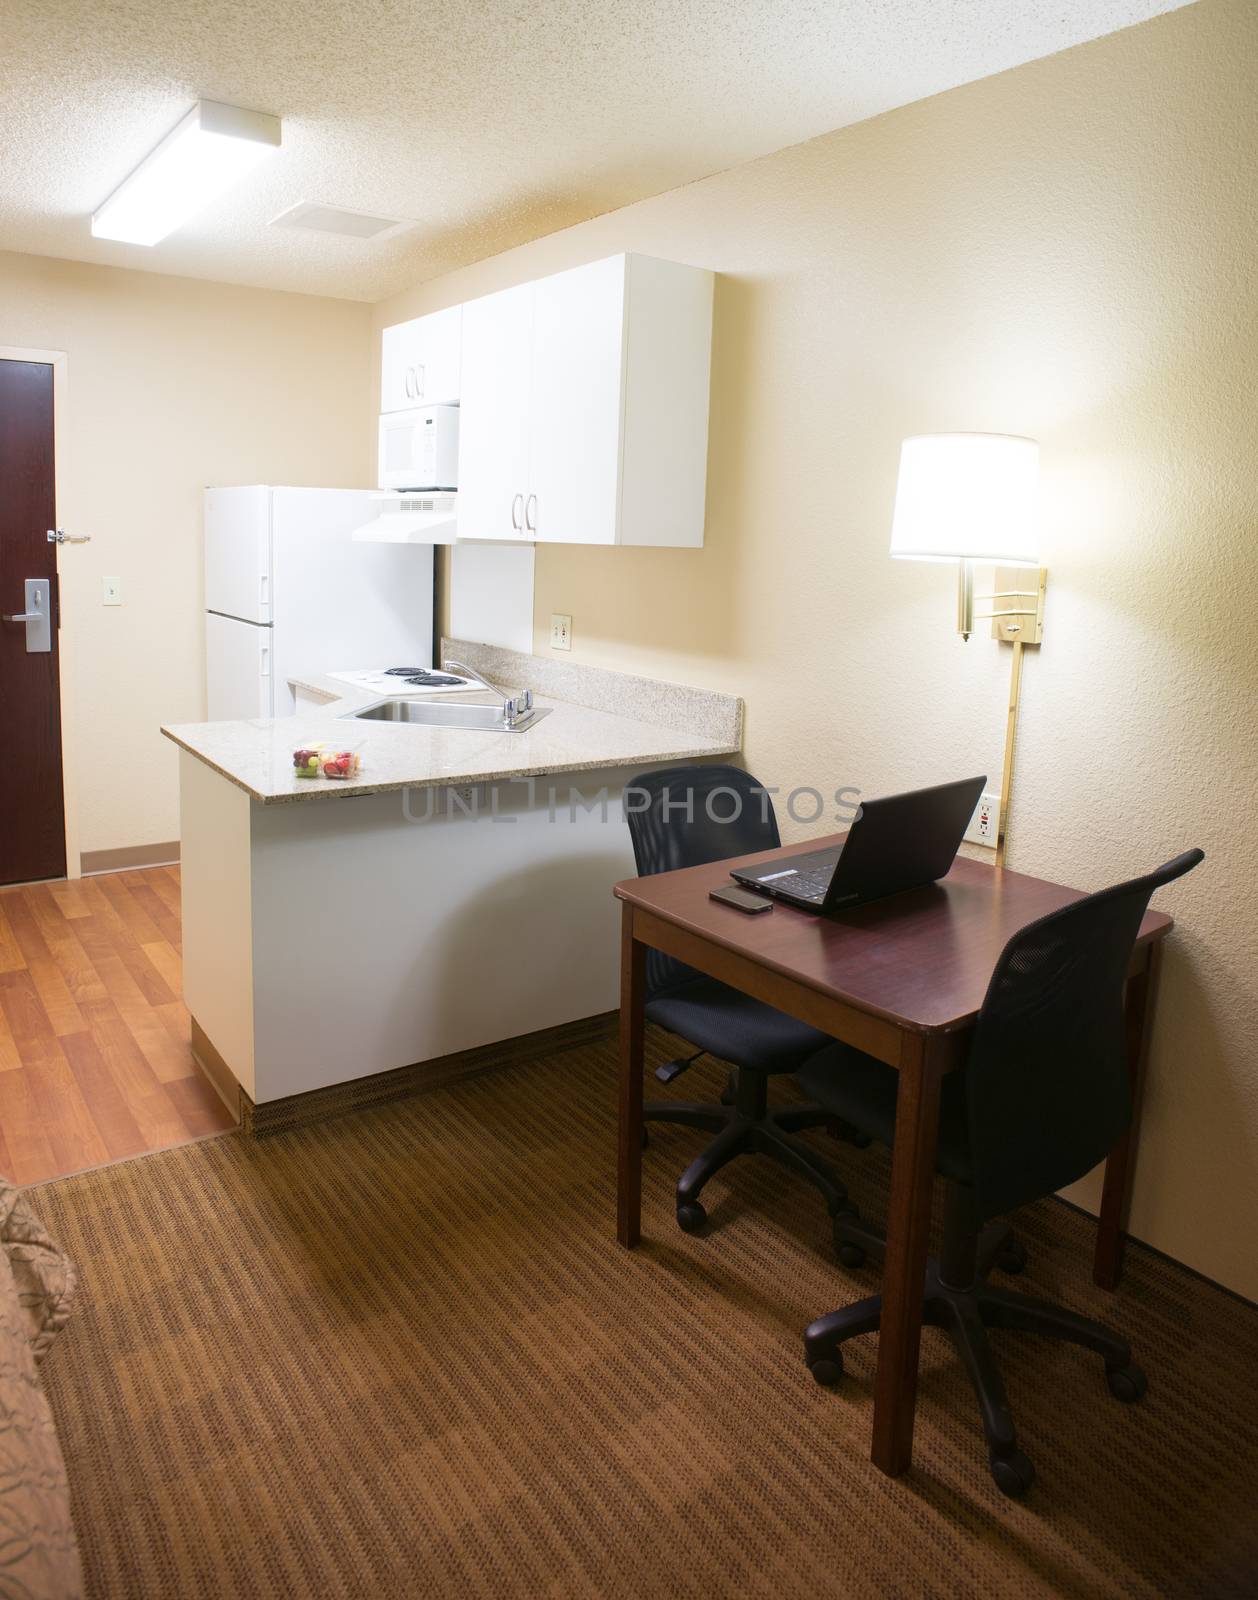 Motel Room Desk and Kitchen Area Hotel Traveler by ChrisBoswell